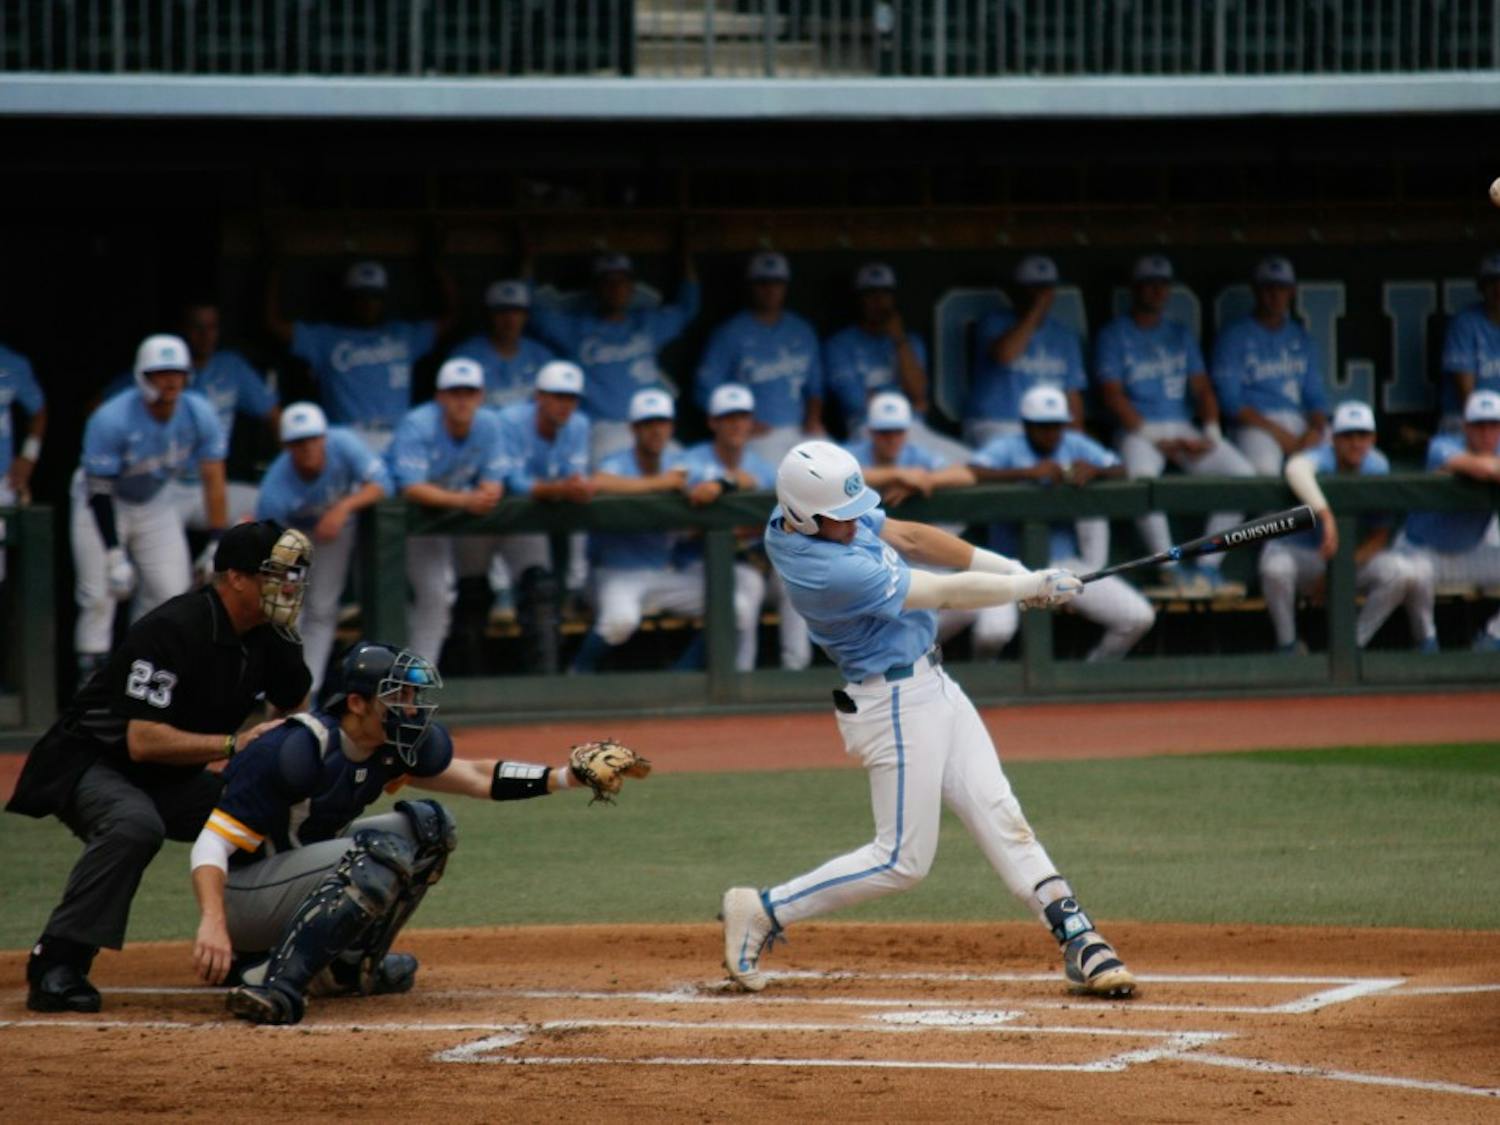 UNC first-year short stop Danny Serretti (1) at bat against UNCG in Boshamer Stadium on Wednesday, April 9, 2019. The Tar Heels beat the Spartans 17-4.